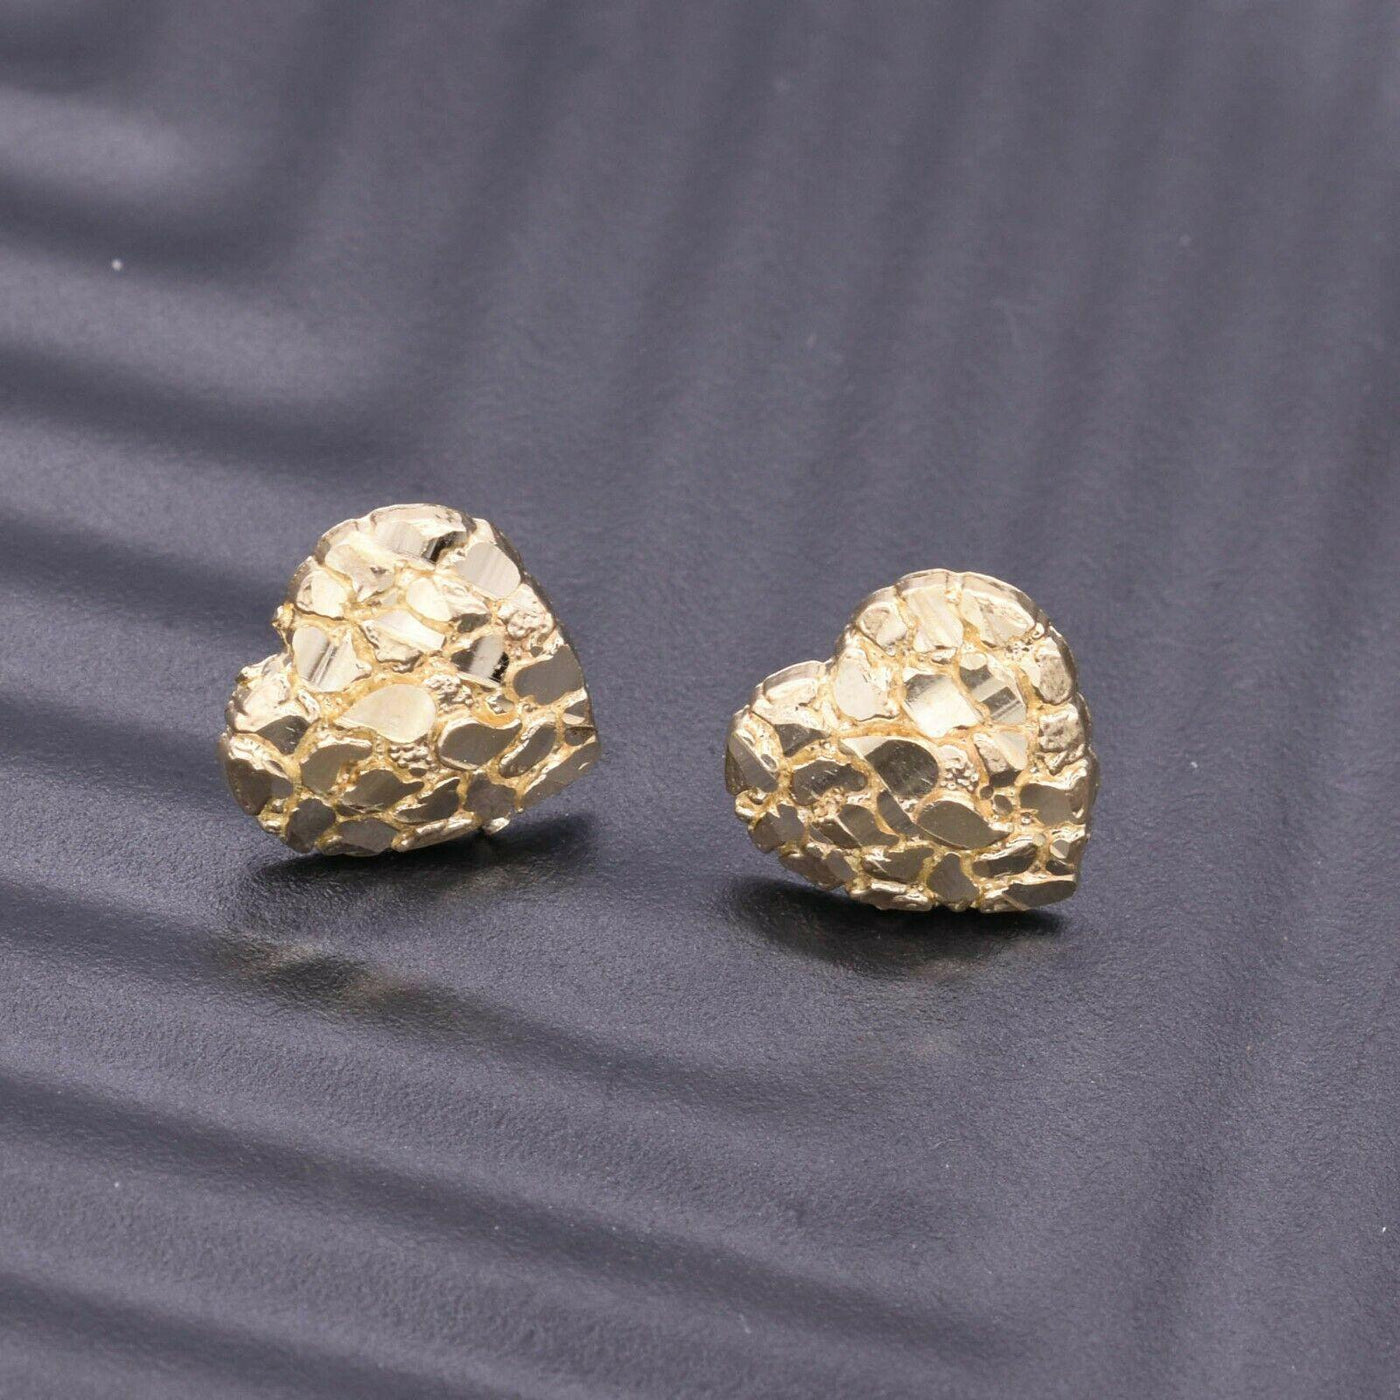 Small Heart Shaped Nugget Textured Stud Earrings Solid 10K Yellow Gold - bayamjewelry